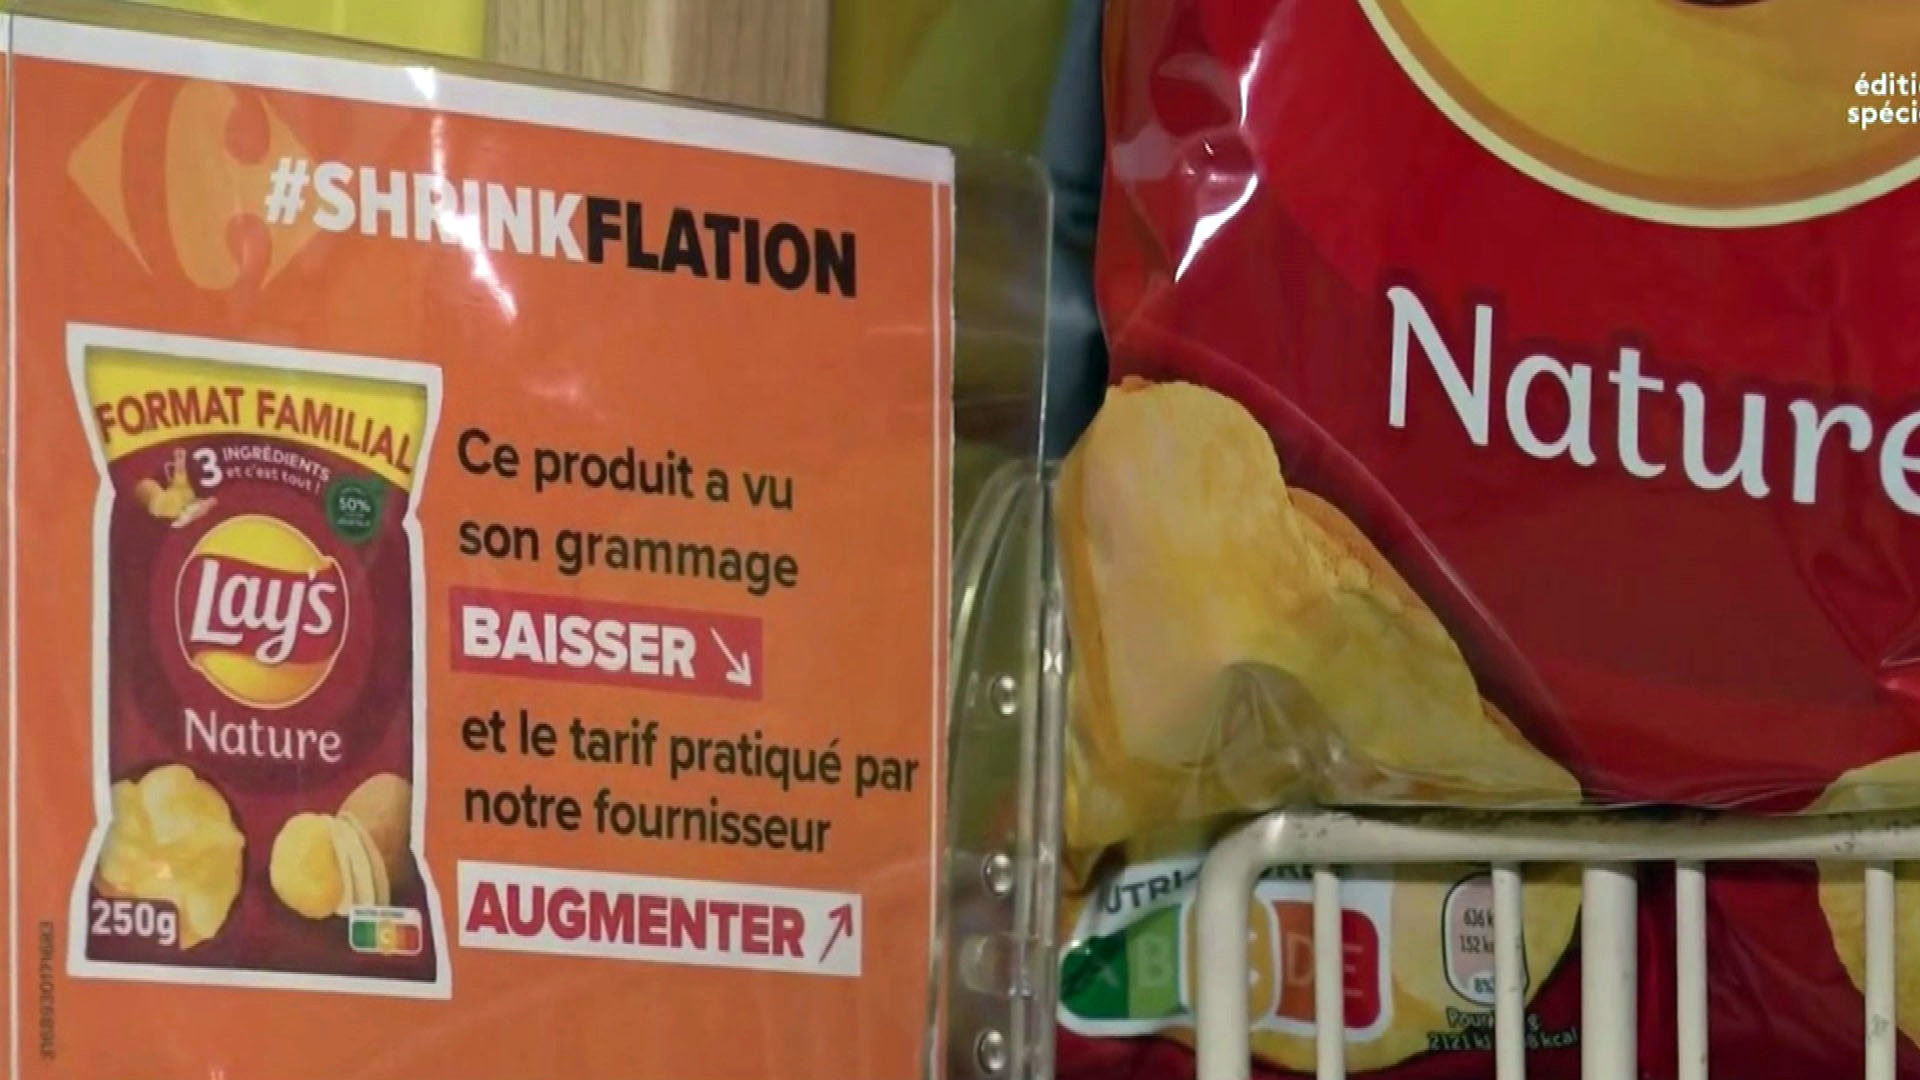 A label in a French supermarket calling out shrinkflation.